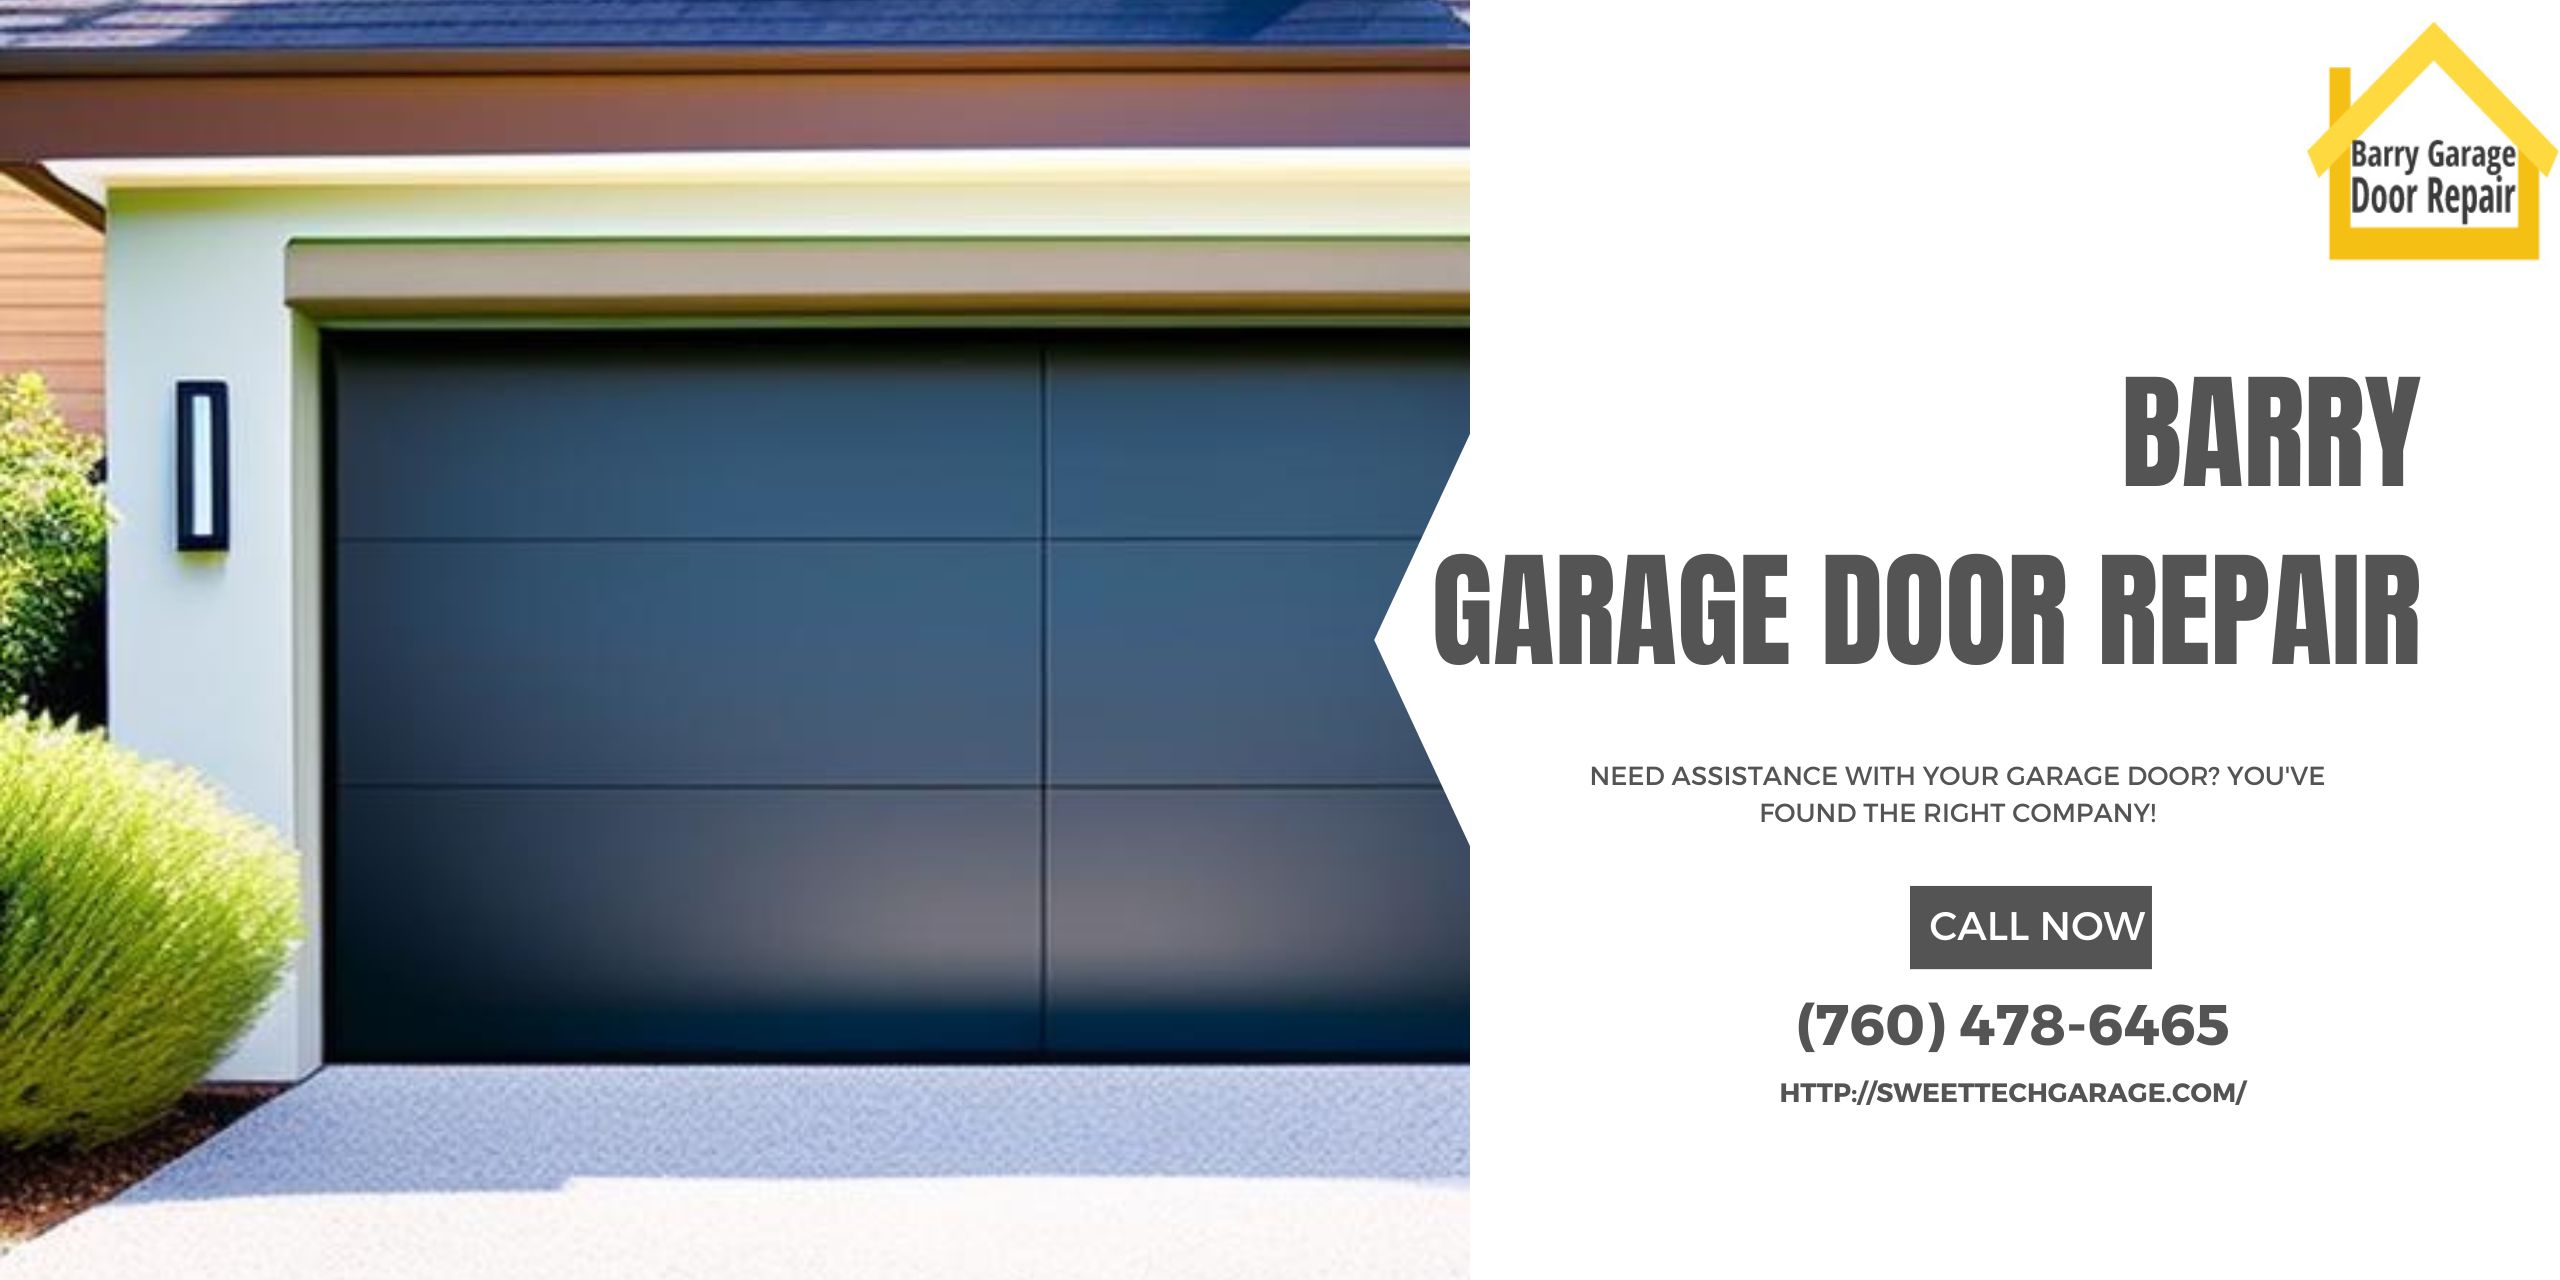 From Telemedicine to Telegarage: The Innovative Intersection of Medical and Garage Door Technologies